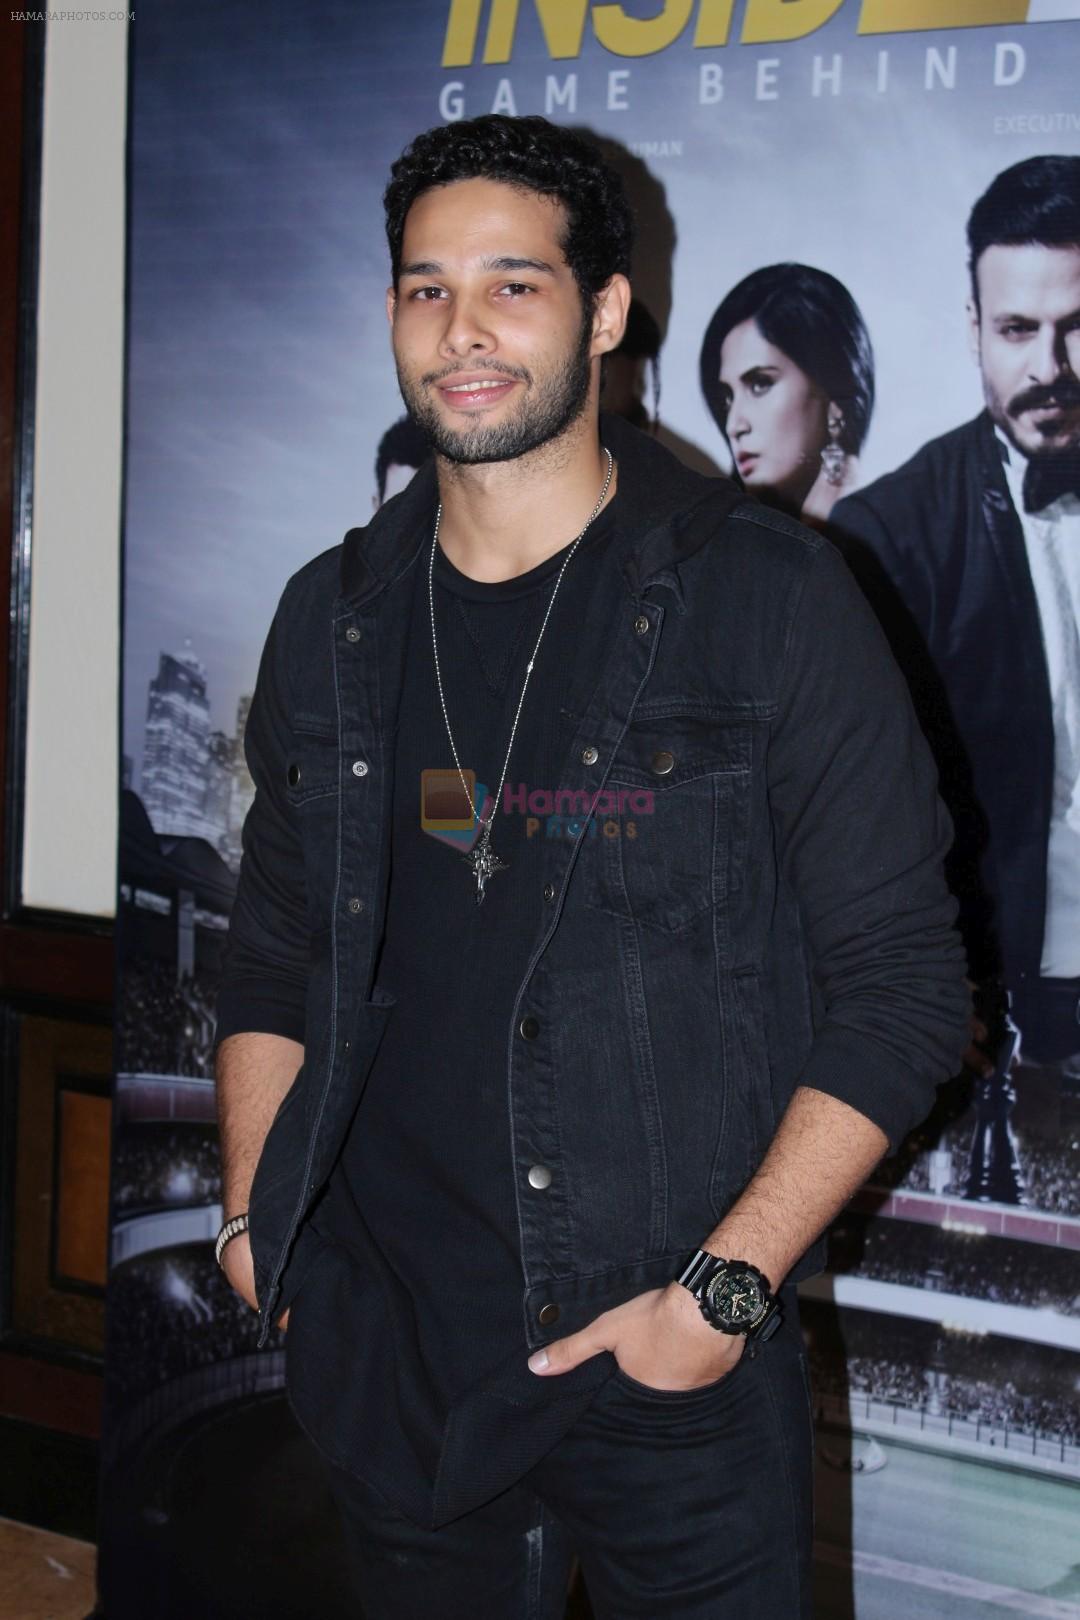 Siddhant Chaturvedi at the Success Party of Web Series INSIDE EDGE on 29th July 2017